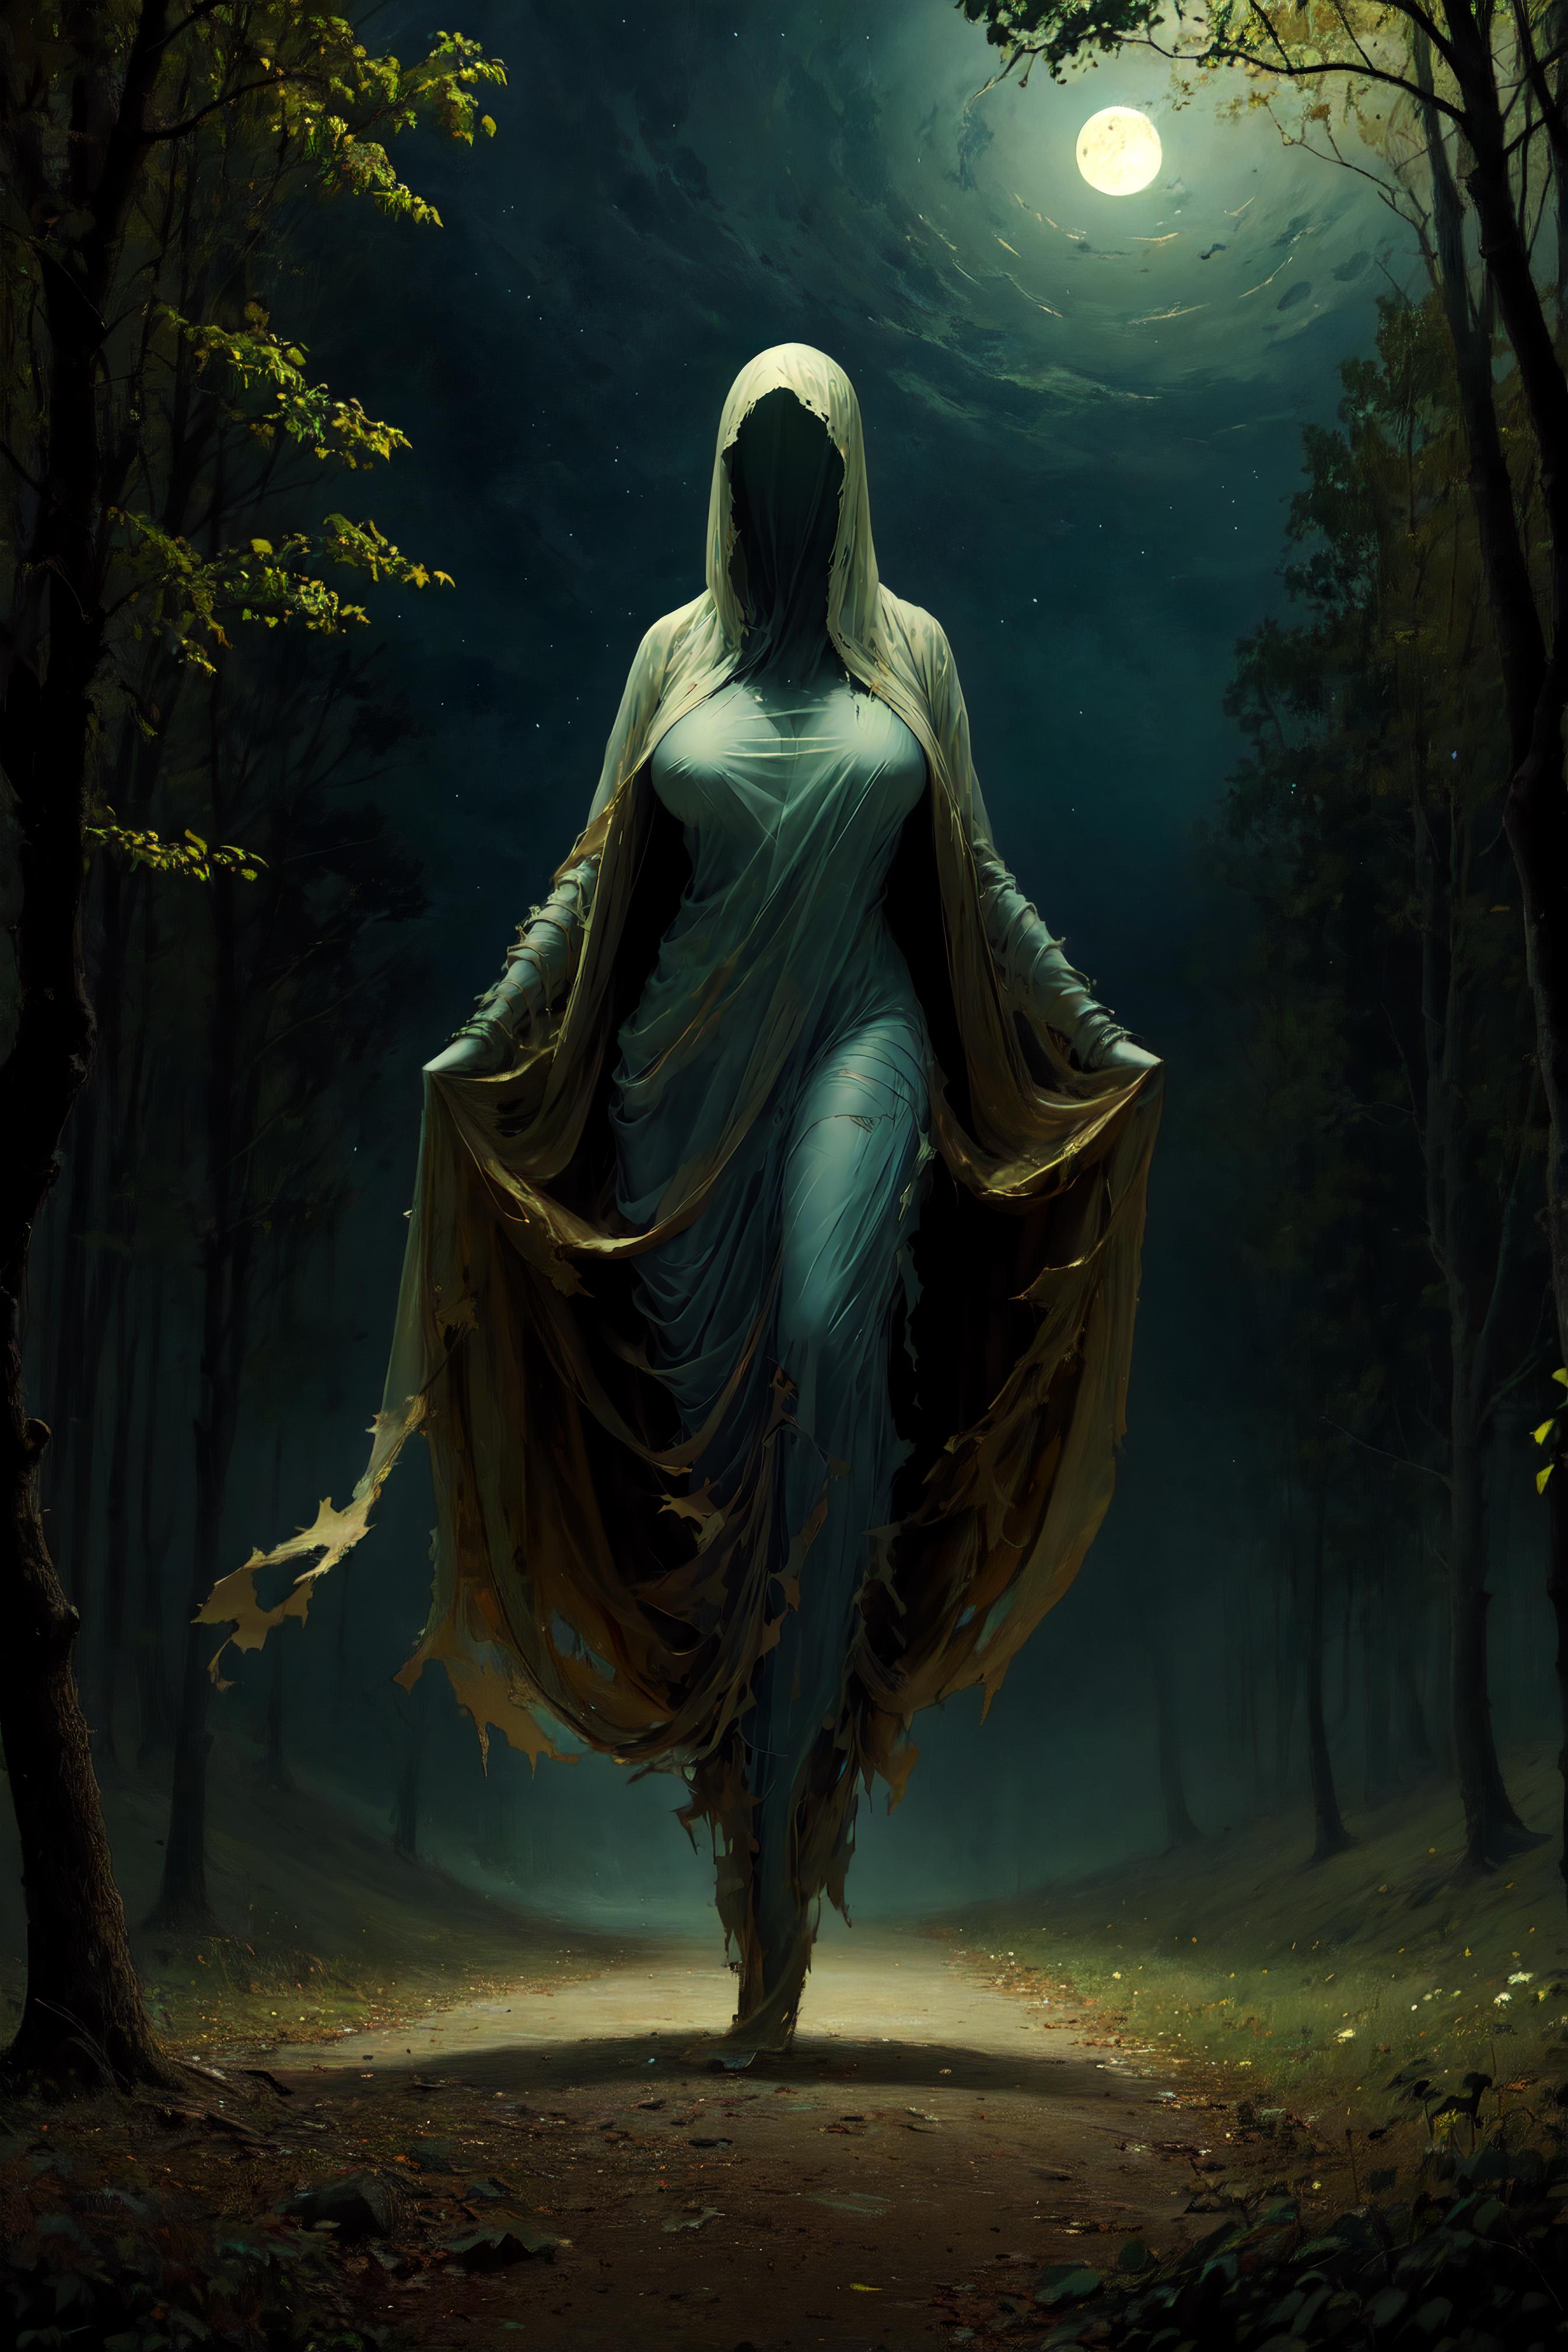 White-draped figure with a flowing cape walking in the woods at night.